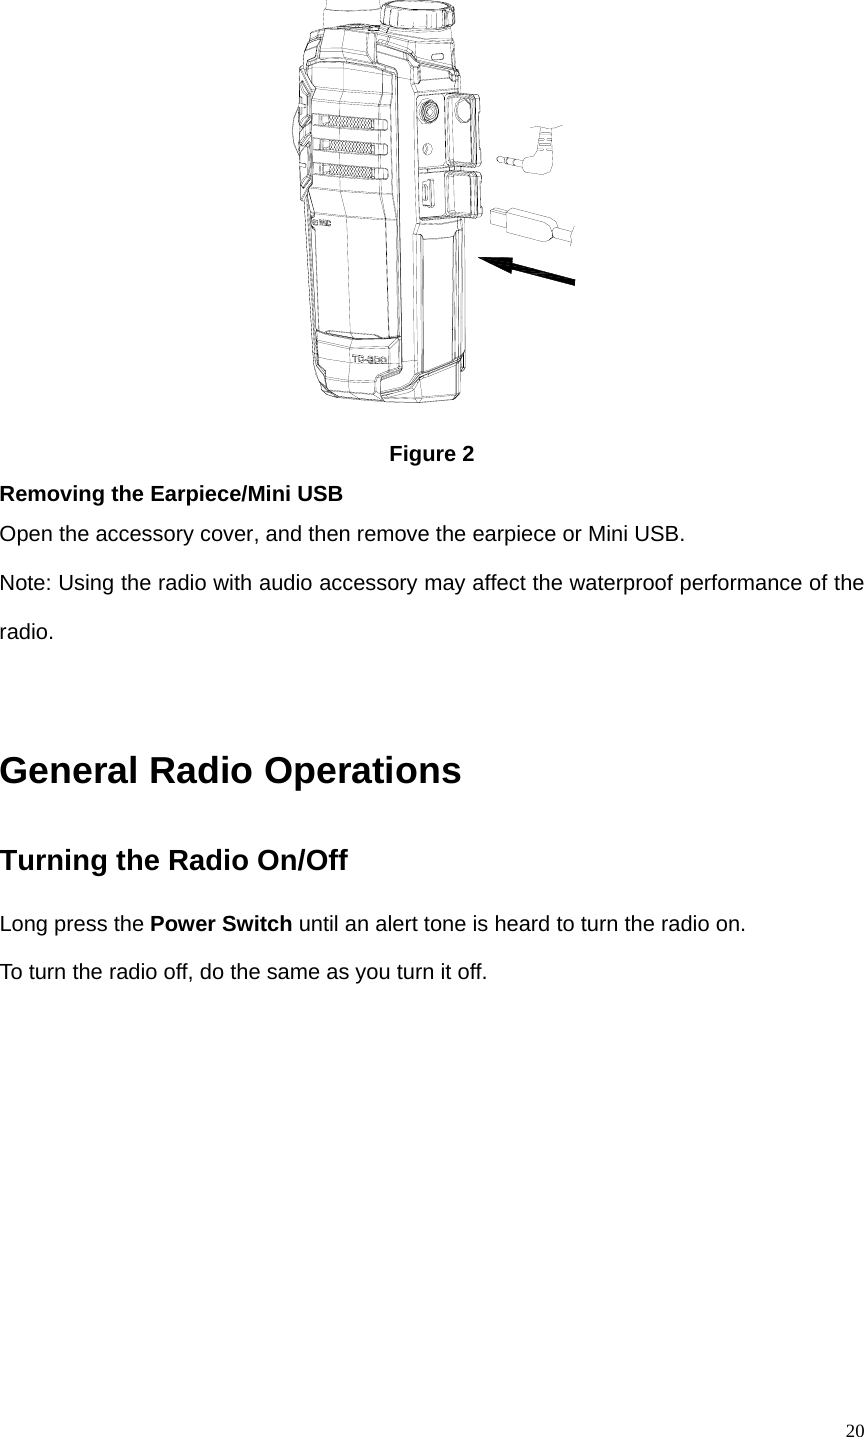   20 Figure 2 Removing the Earpiece/Mini USB Open the accessory cover, and then remove the earpiece or Mini USB.   Note: Using the radio with audio accessory may affect the waterproof performance of the radio.    General Radio Operations Turning the Radio On/Off Long press the Power Switch until an alert tone is heard to turn the radio on.   To turn the radio off, do the same as you turn it off.    